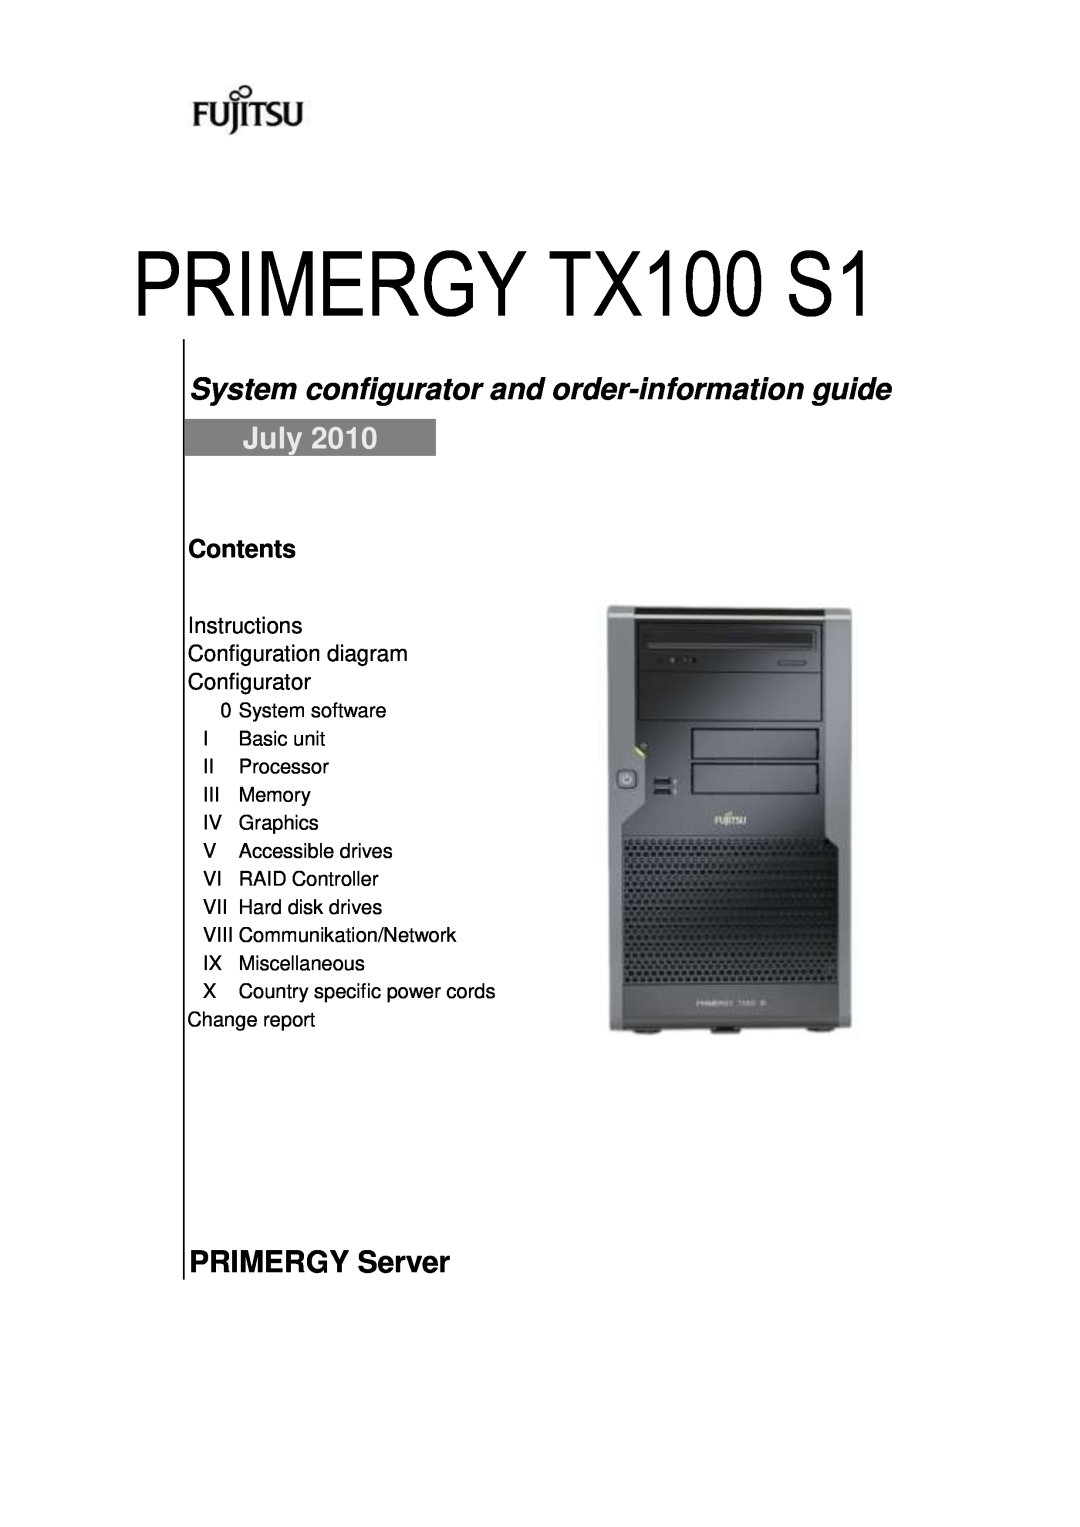 Fujitsu manual PRIMERGY TX100 S1, System configurator and order-information guide, July, PRIMERGY Server, Contents 